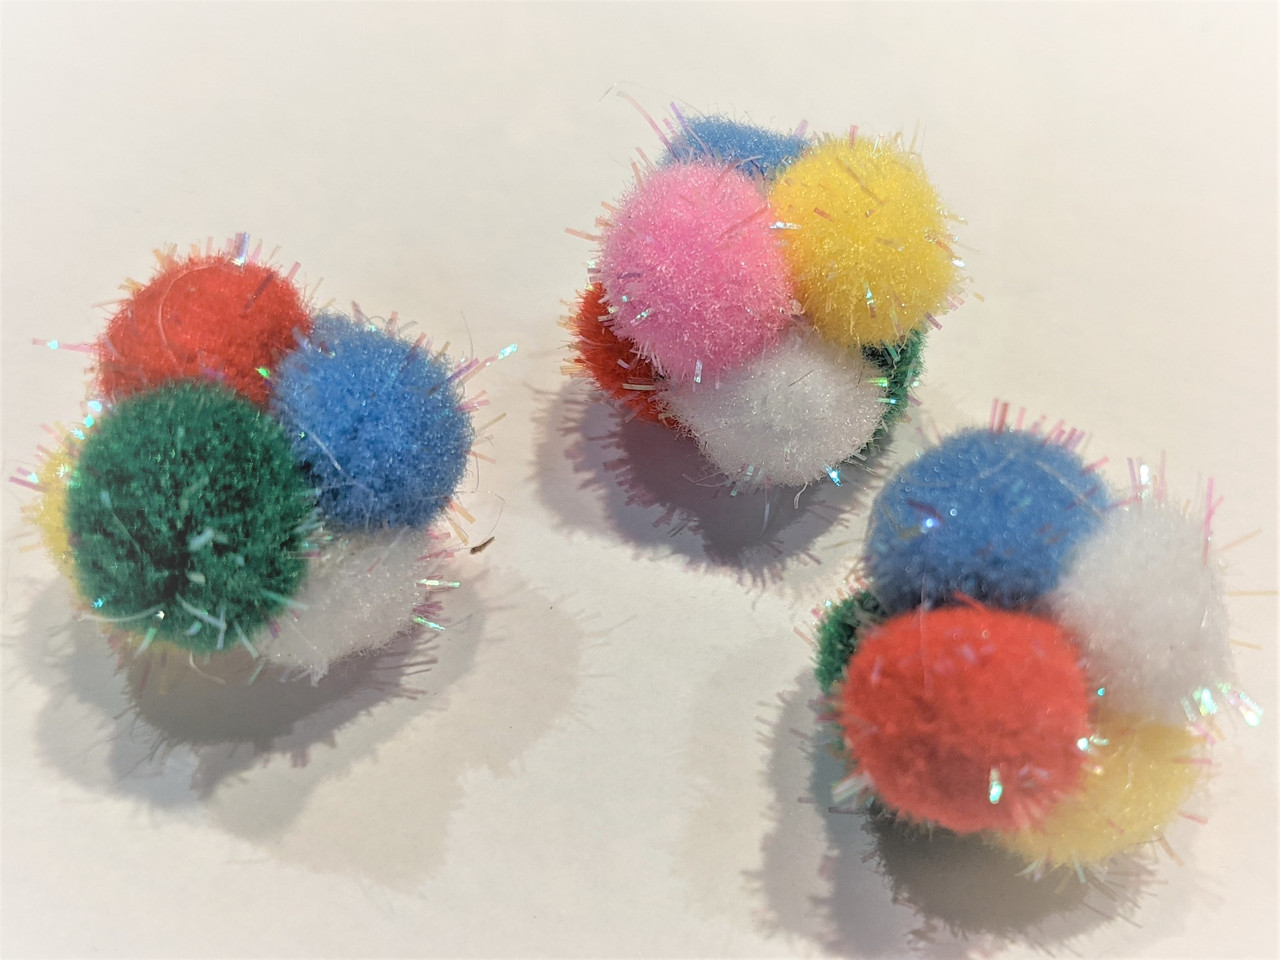 Glittery molecule pom-poms with a bit of a bounce and a lot of roll! Approx. 1.5 inches.